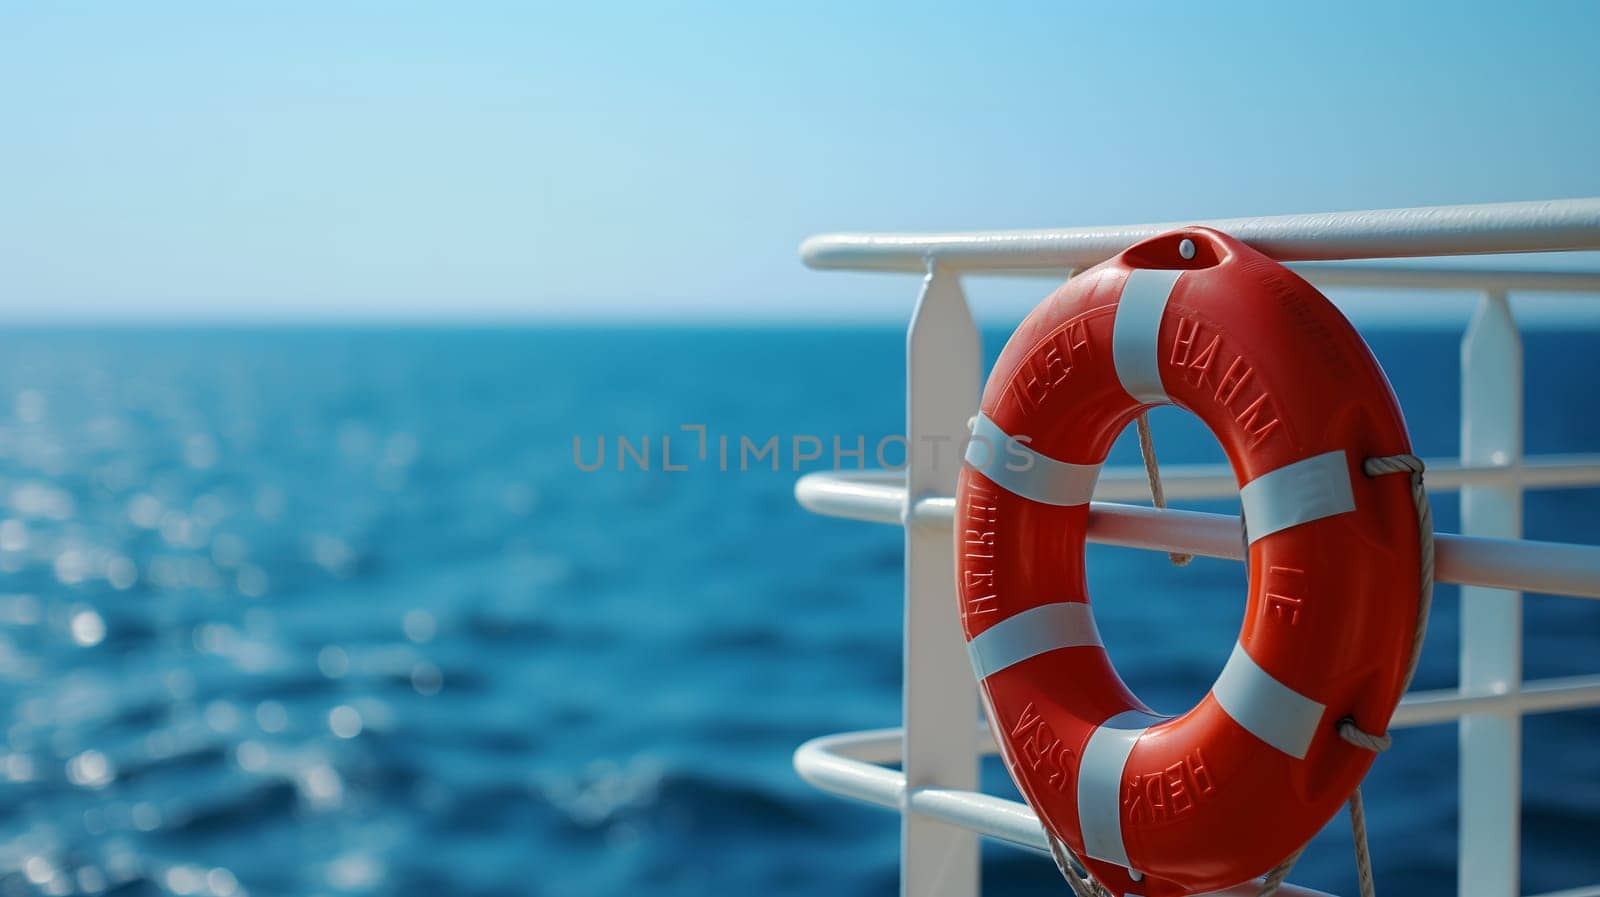 Lifebuoy attached to a ship's white railing, with the clear blue sea in the background. Neural network generated image. Not based on any actual scene or pattern.